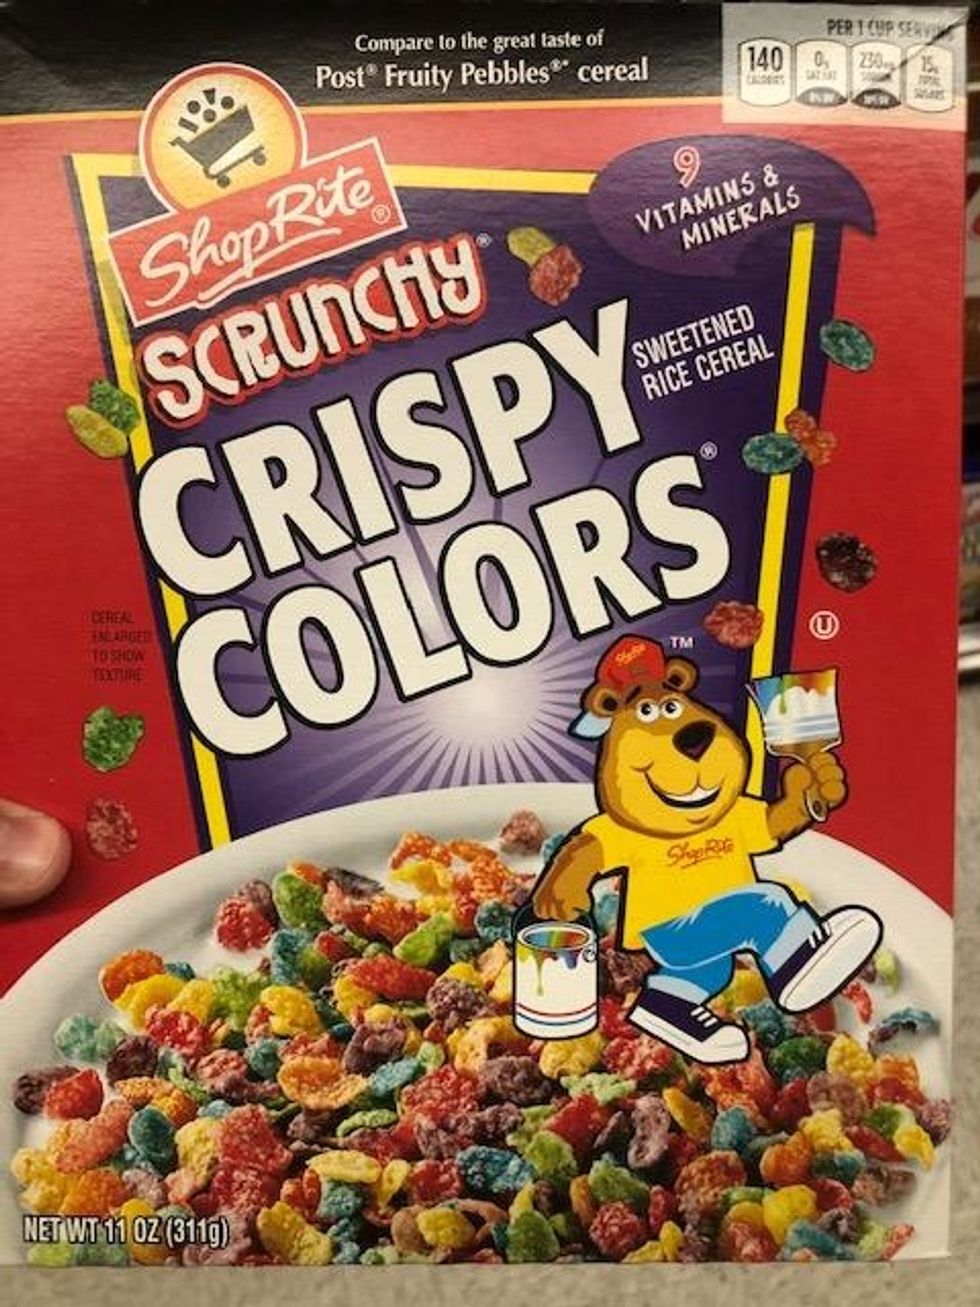 9 Off-Brand Cereal Names Guaranteed to Make You Chuckle